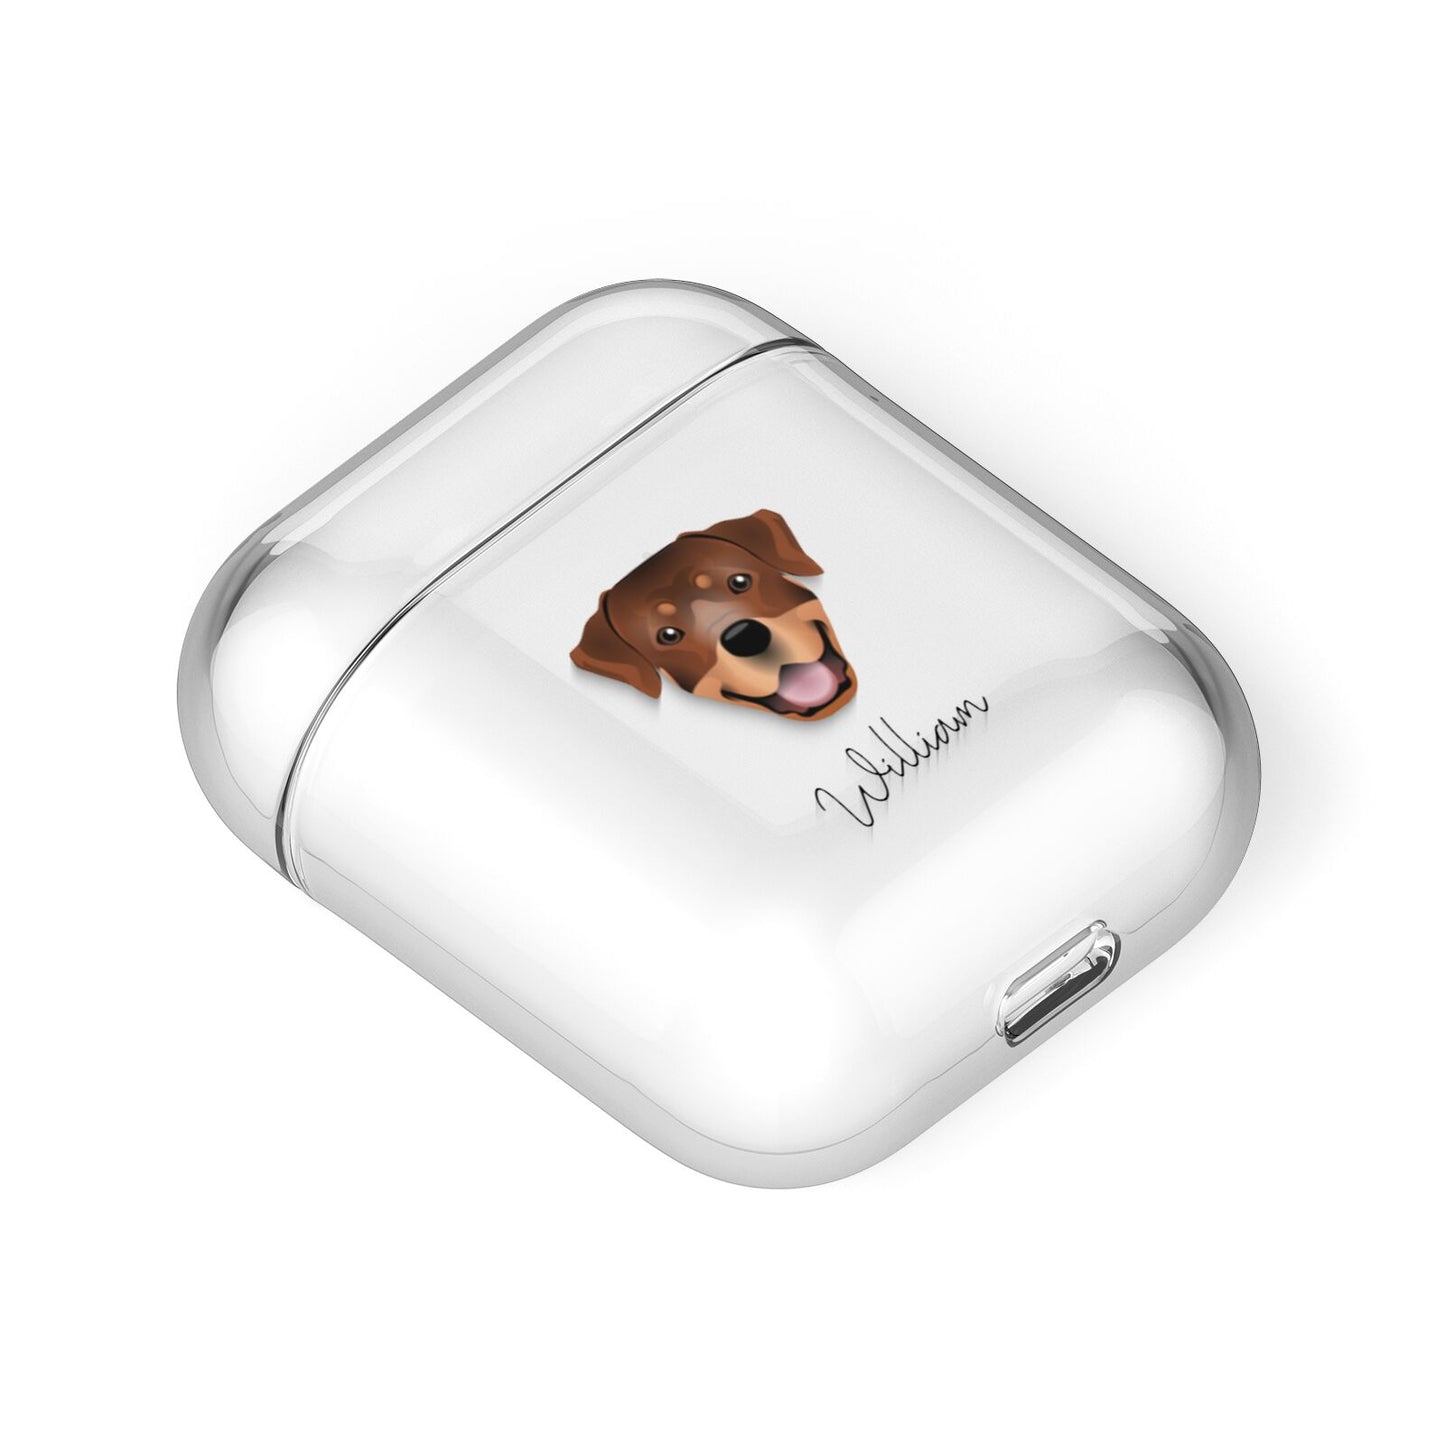 Rottweiler Personalised AirPods Case Laid Flat